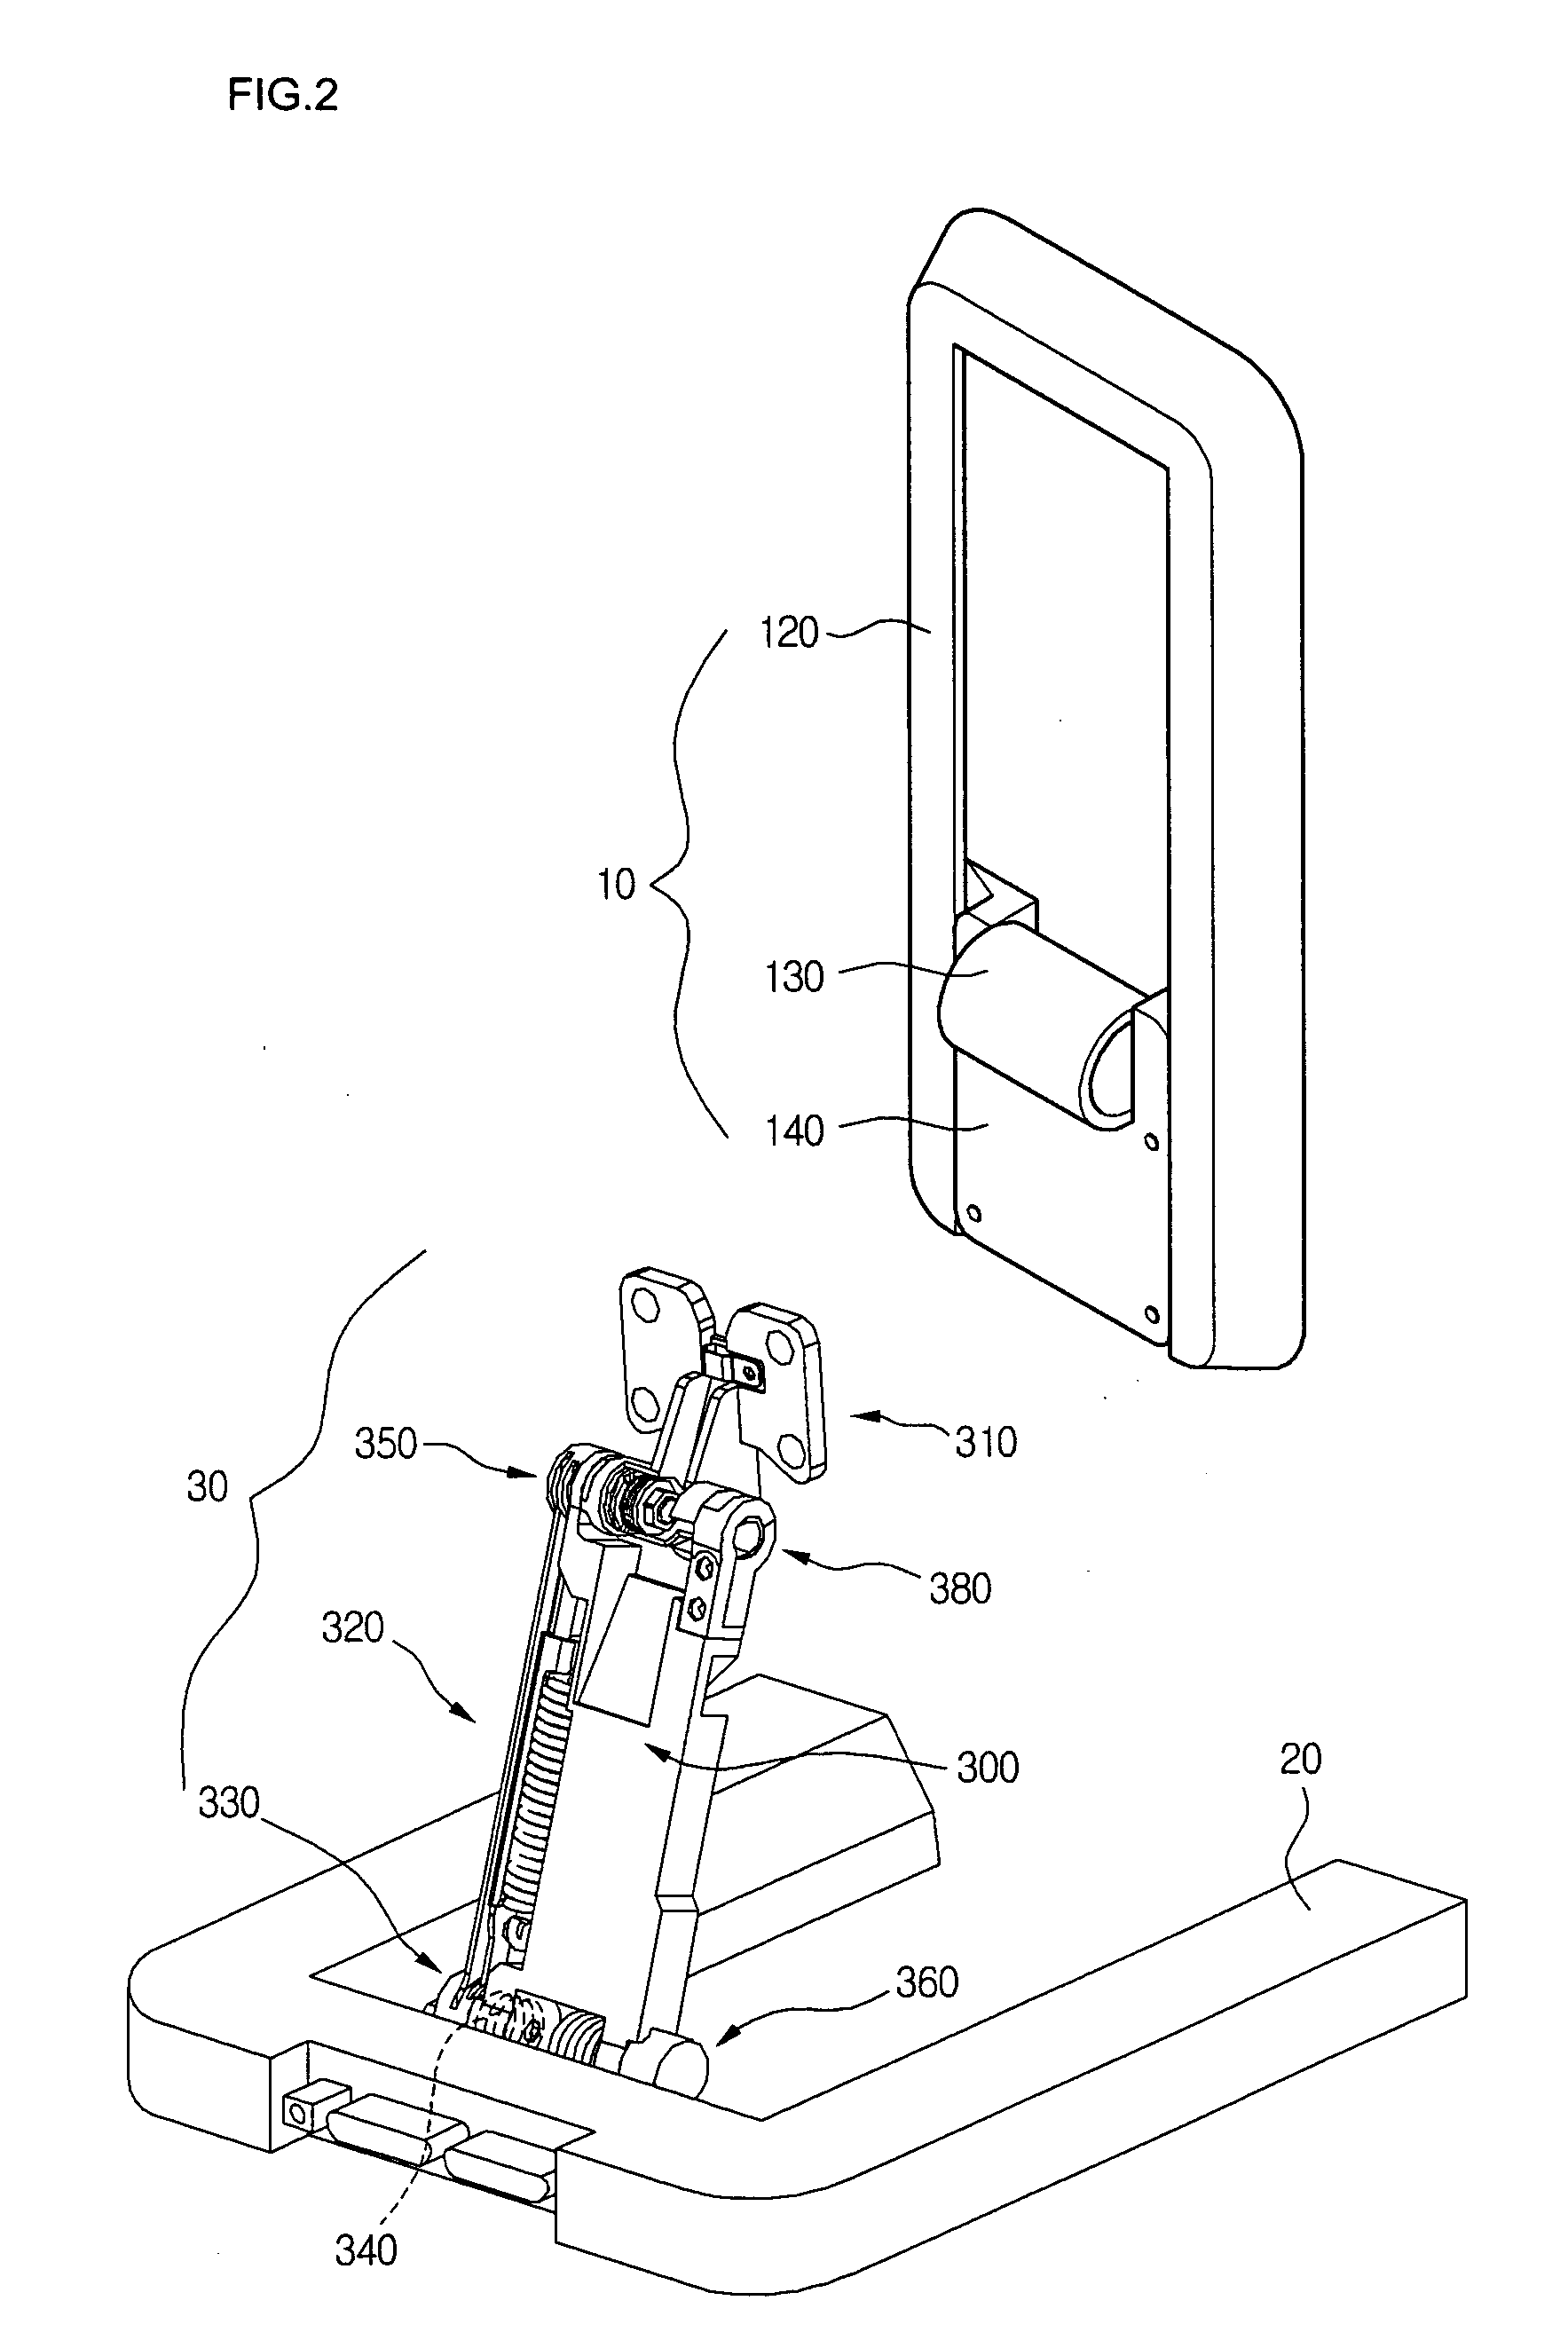 Stand of a display device